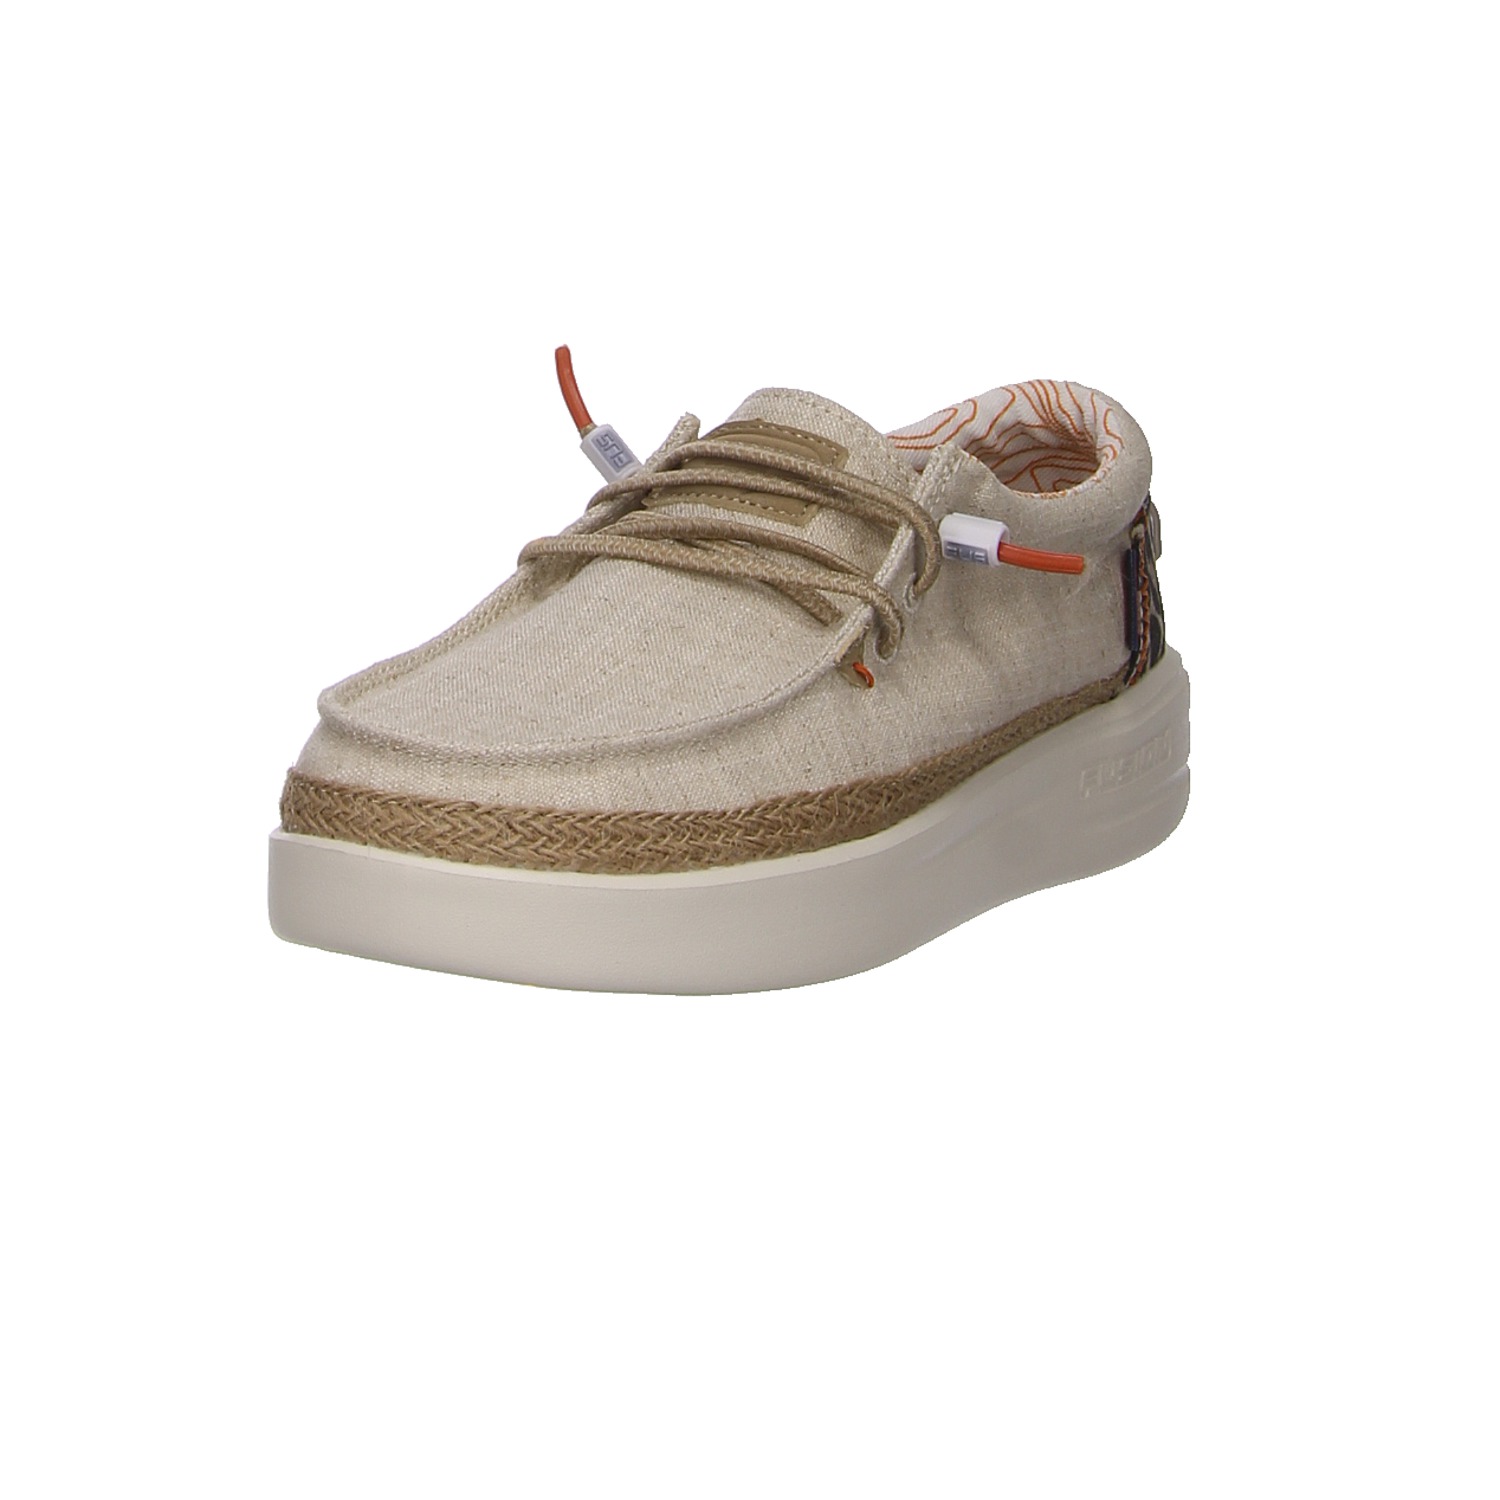 Fusion Sneaker Lily linen sand